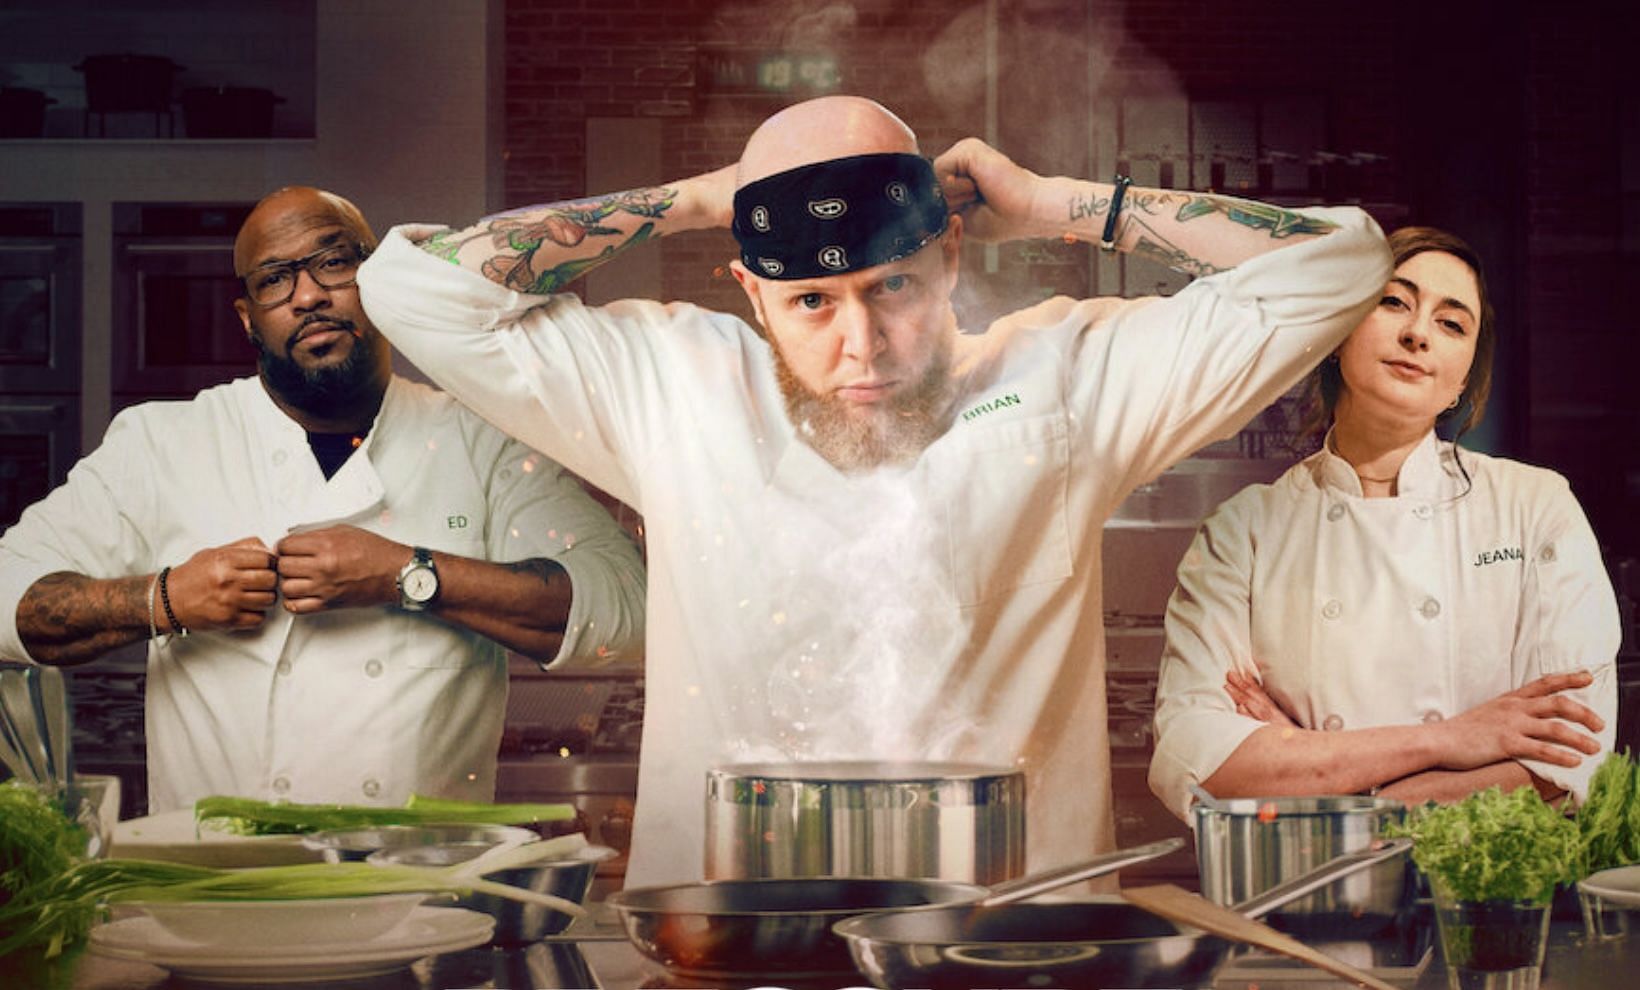 Pressure Cooker will have eleven chefs who will live together and also judge each other&rsquo;s dishes. (Image via Netflix)